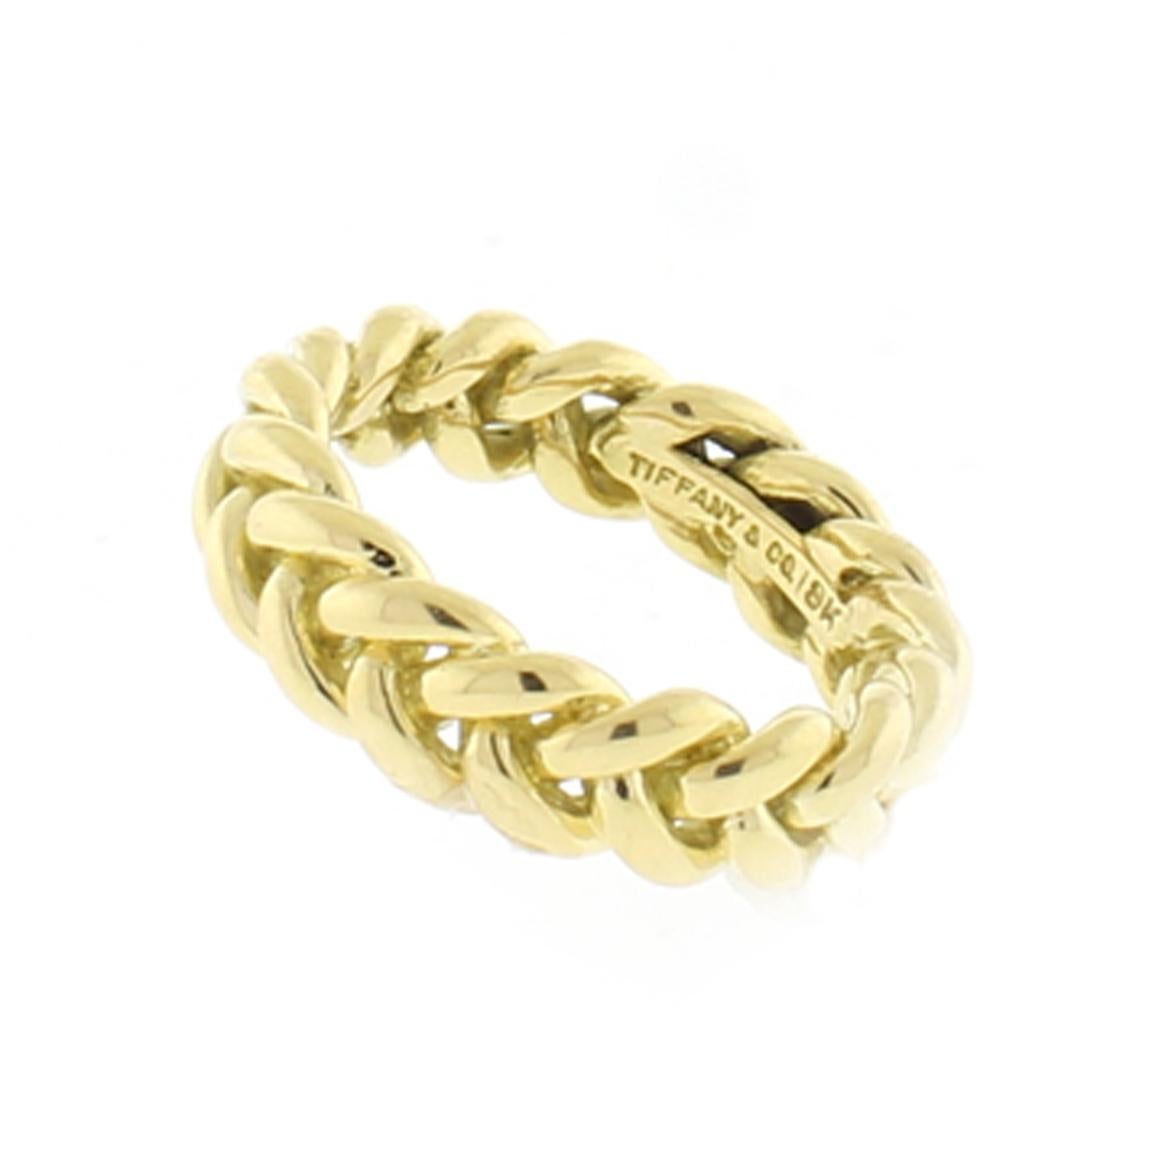 From Tiffany, an 18 karat gold woven band ring.
• Designer Tiffany & Co.
• Metal: 18 karat gold
• Weight: 11 grams
• Width: 6mm
• Circa: 21st Century
• Size: 7 3/4 cannot be resized
• Packaging:  Tiffany Pouch
• Condition: Excellent
